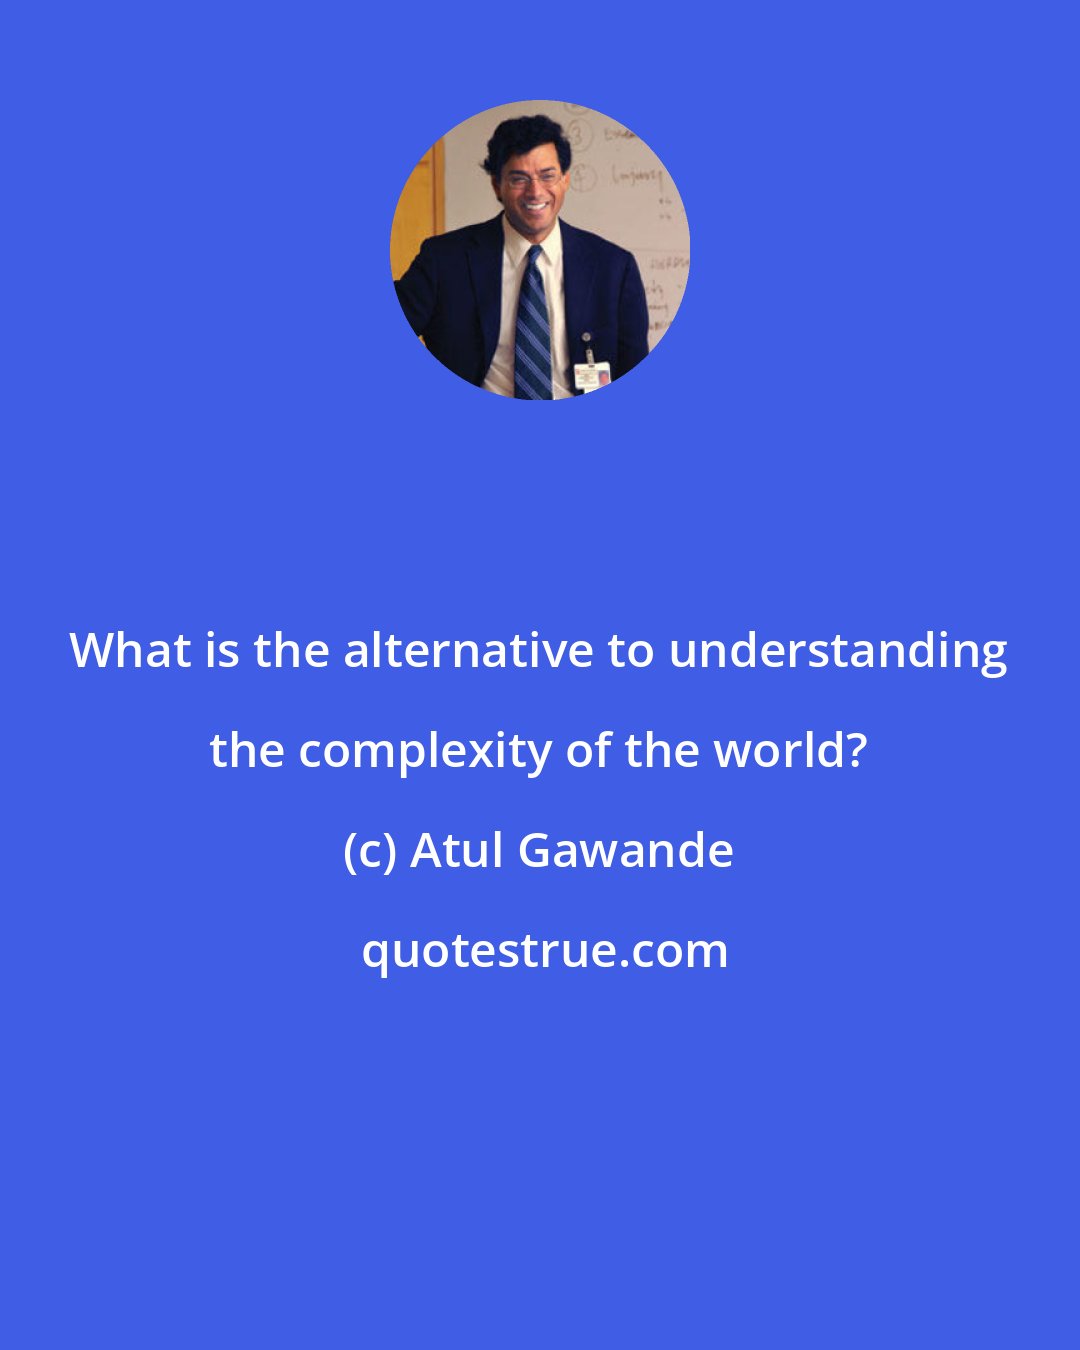 Atul Gawande: What is the alternative to understanding the complexity of the world?